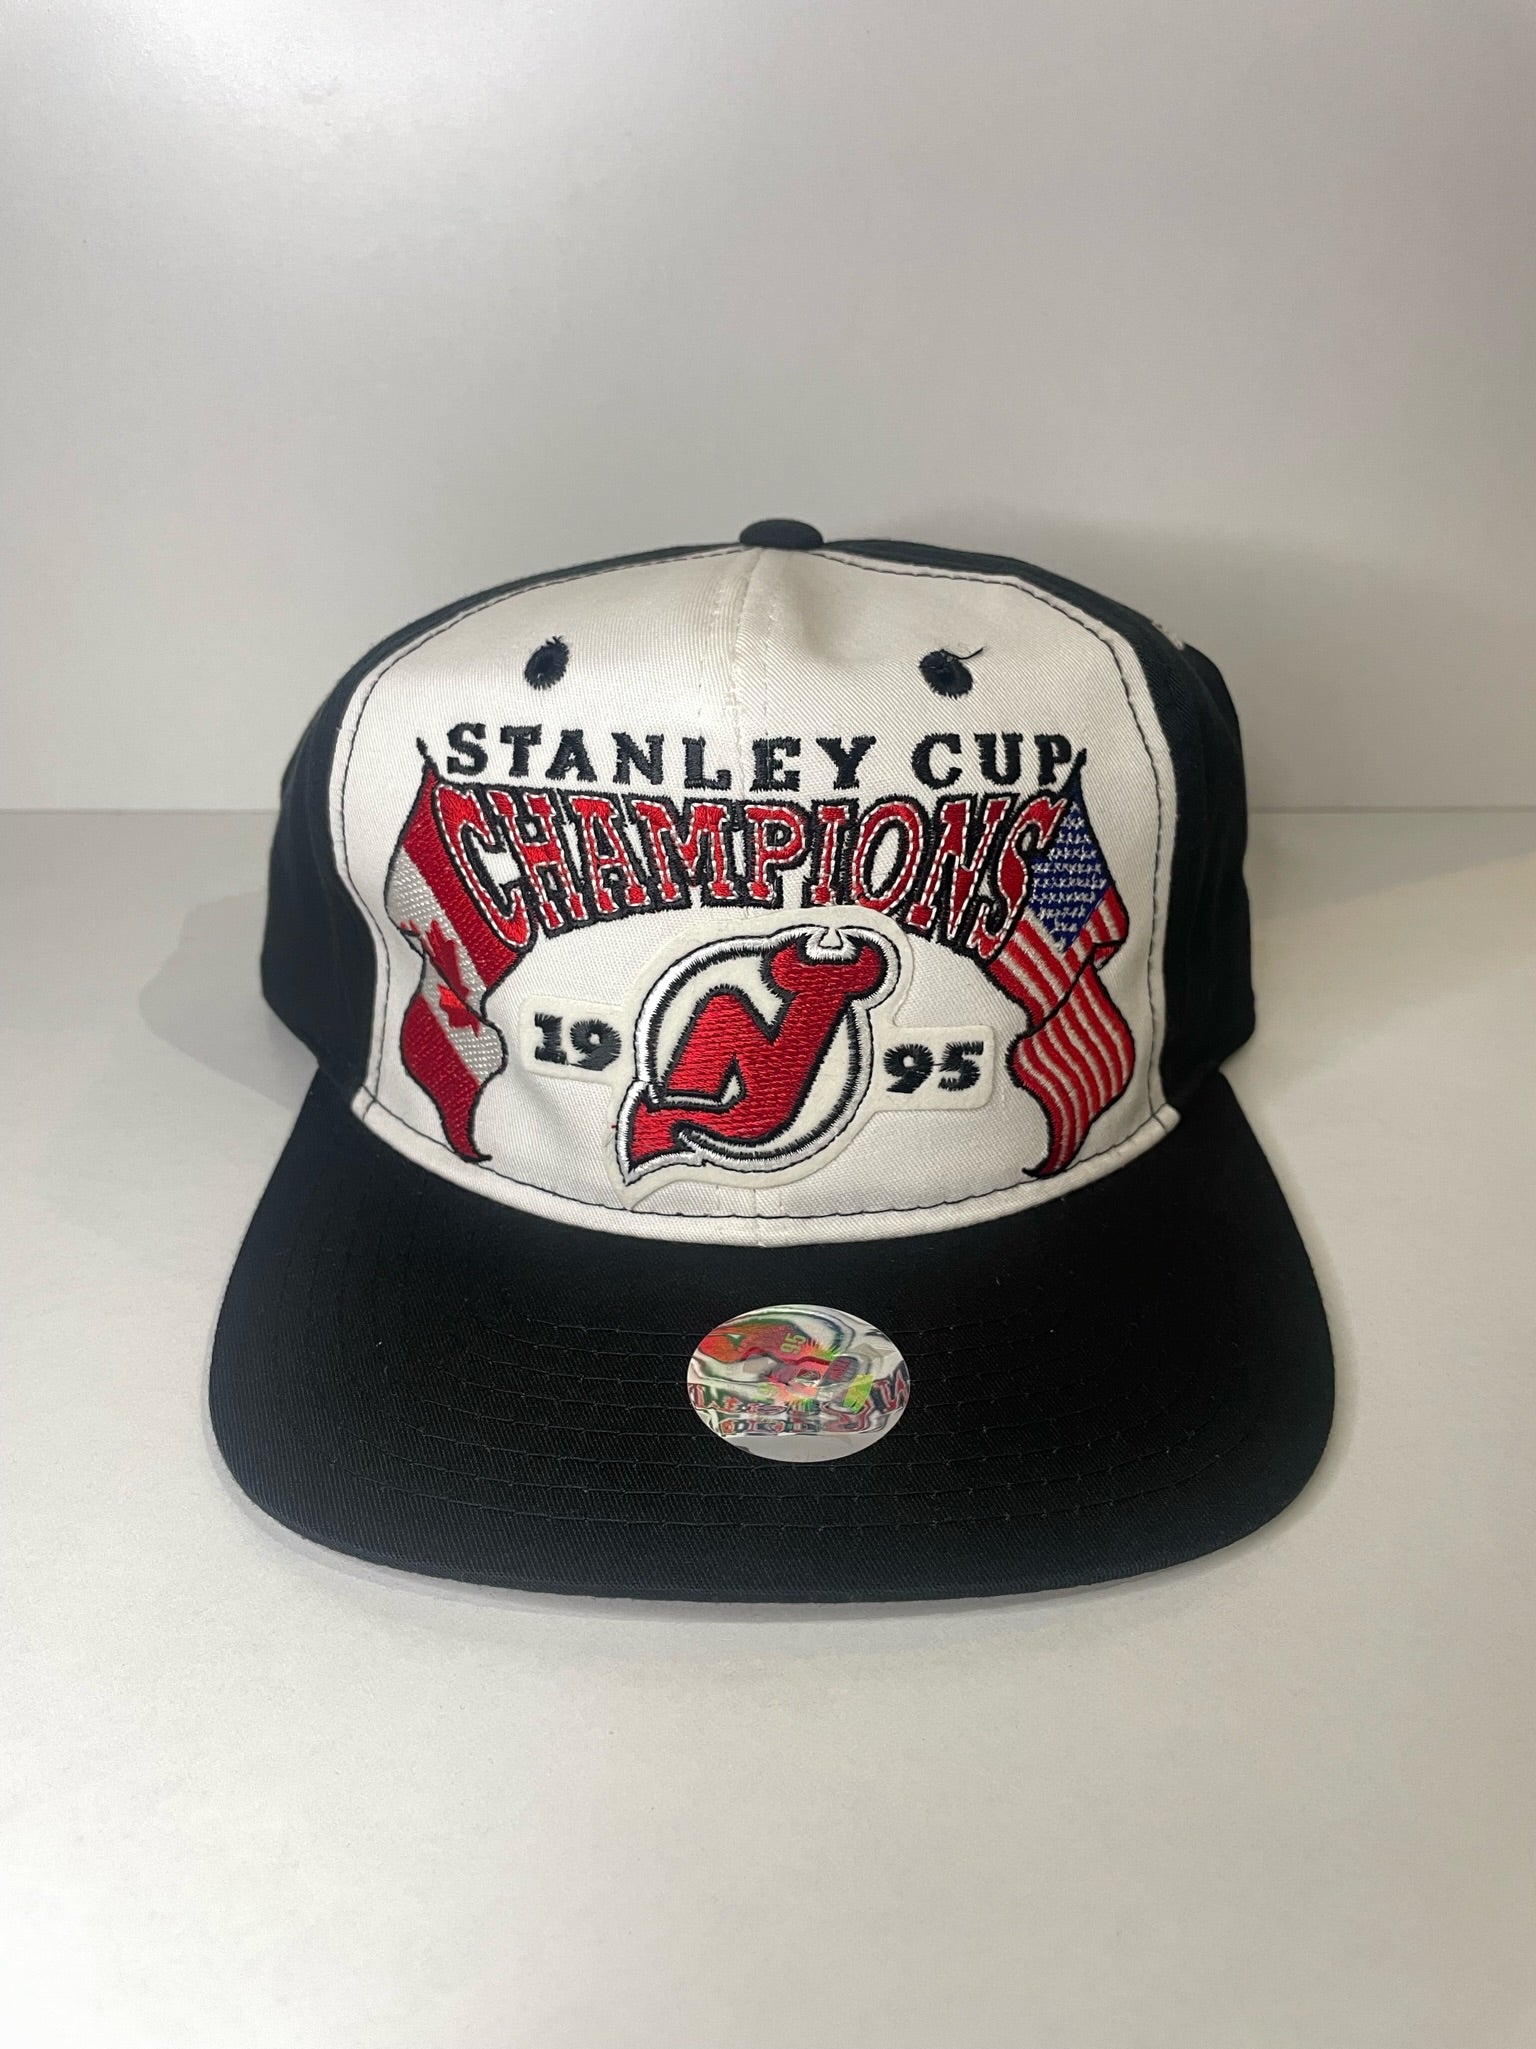 New Jersey Devils NHL Stanley Cup Champions 1995 Snapback Hat Brand NEW  With TAGS Official Starter Hat Adjustable Unisex Adult